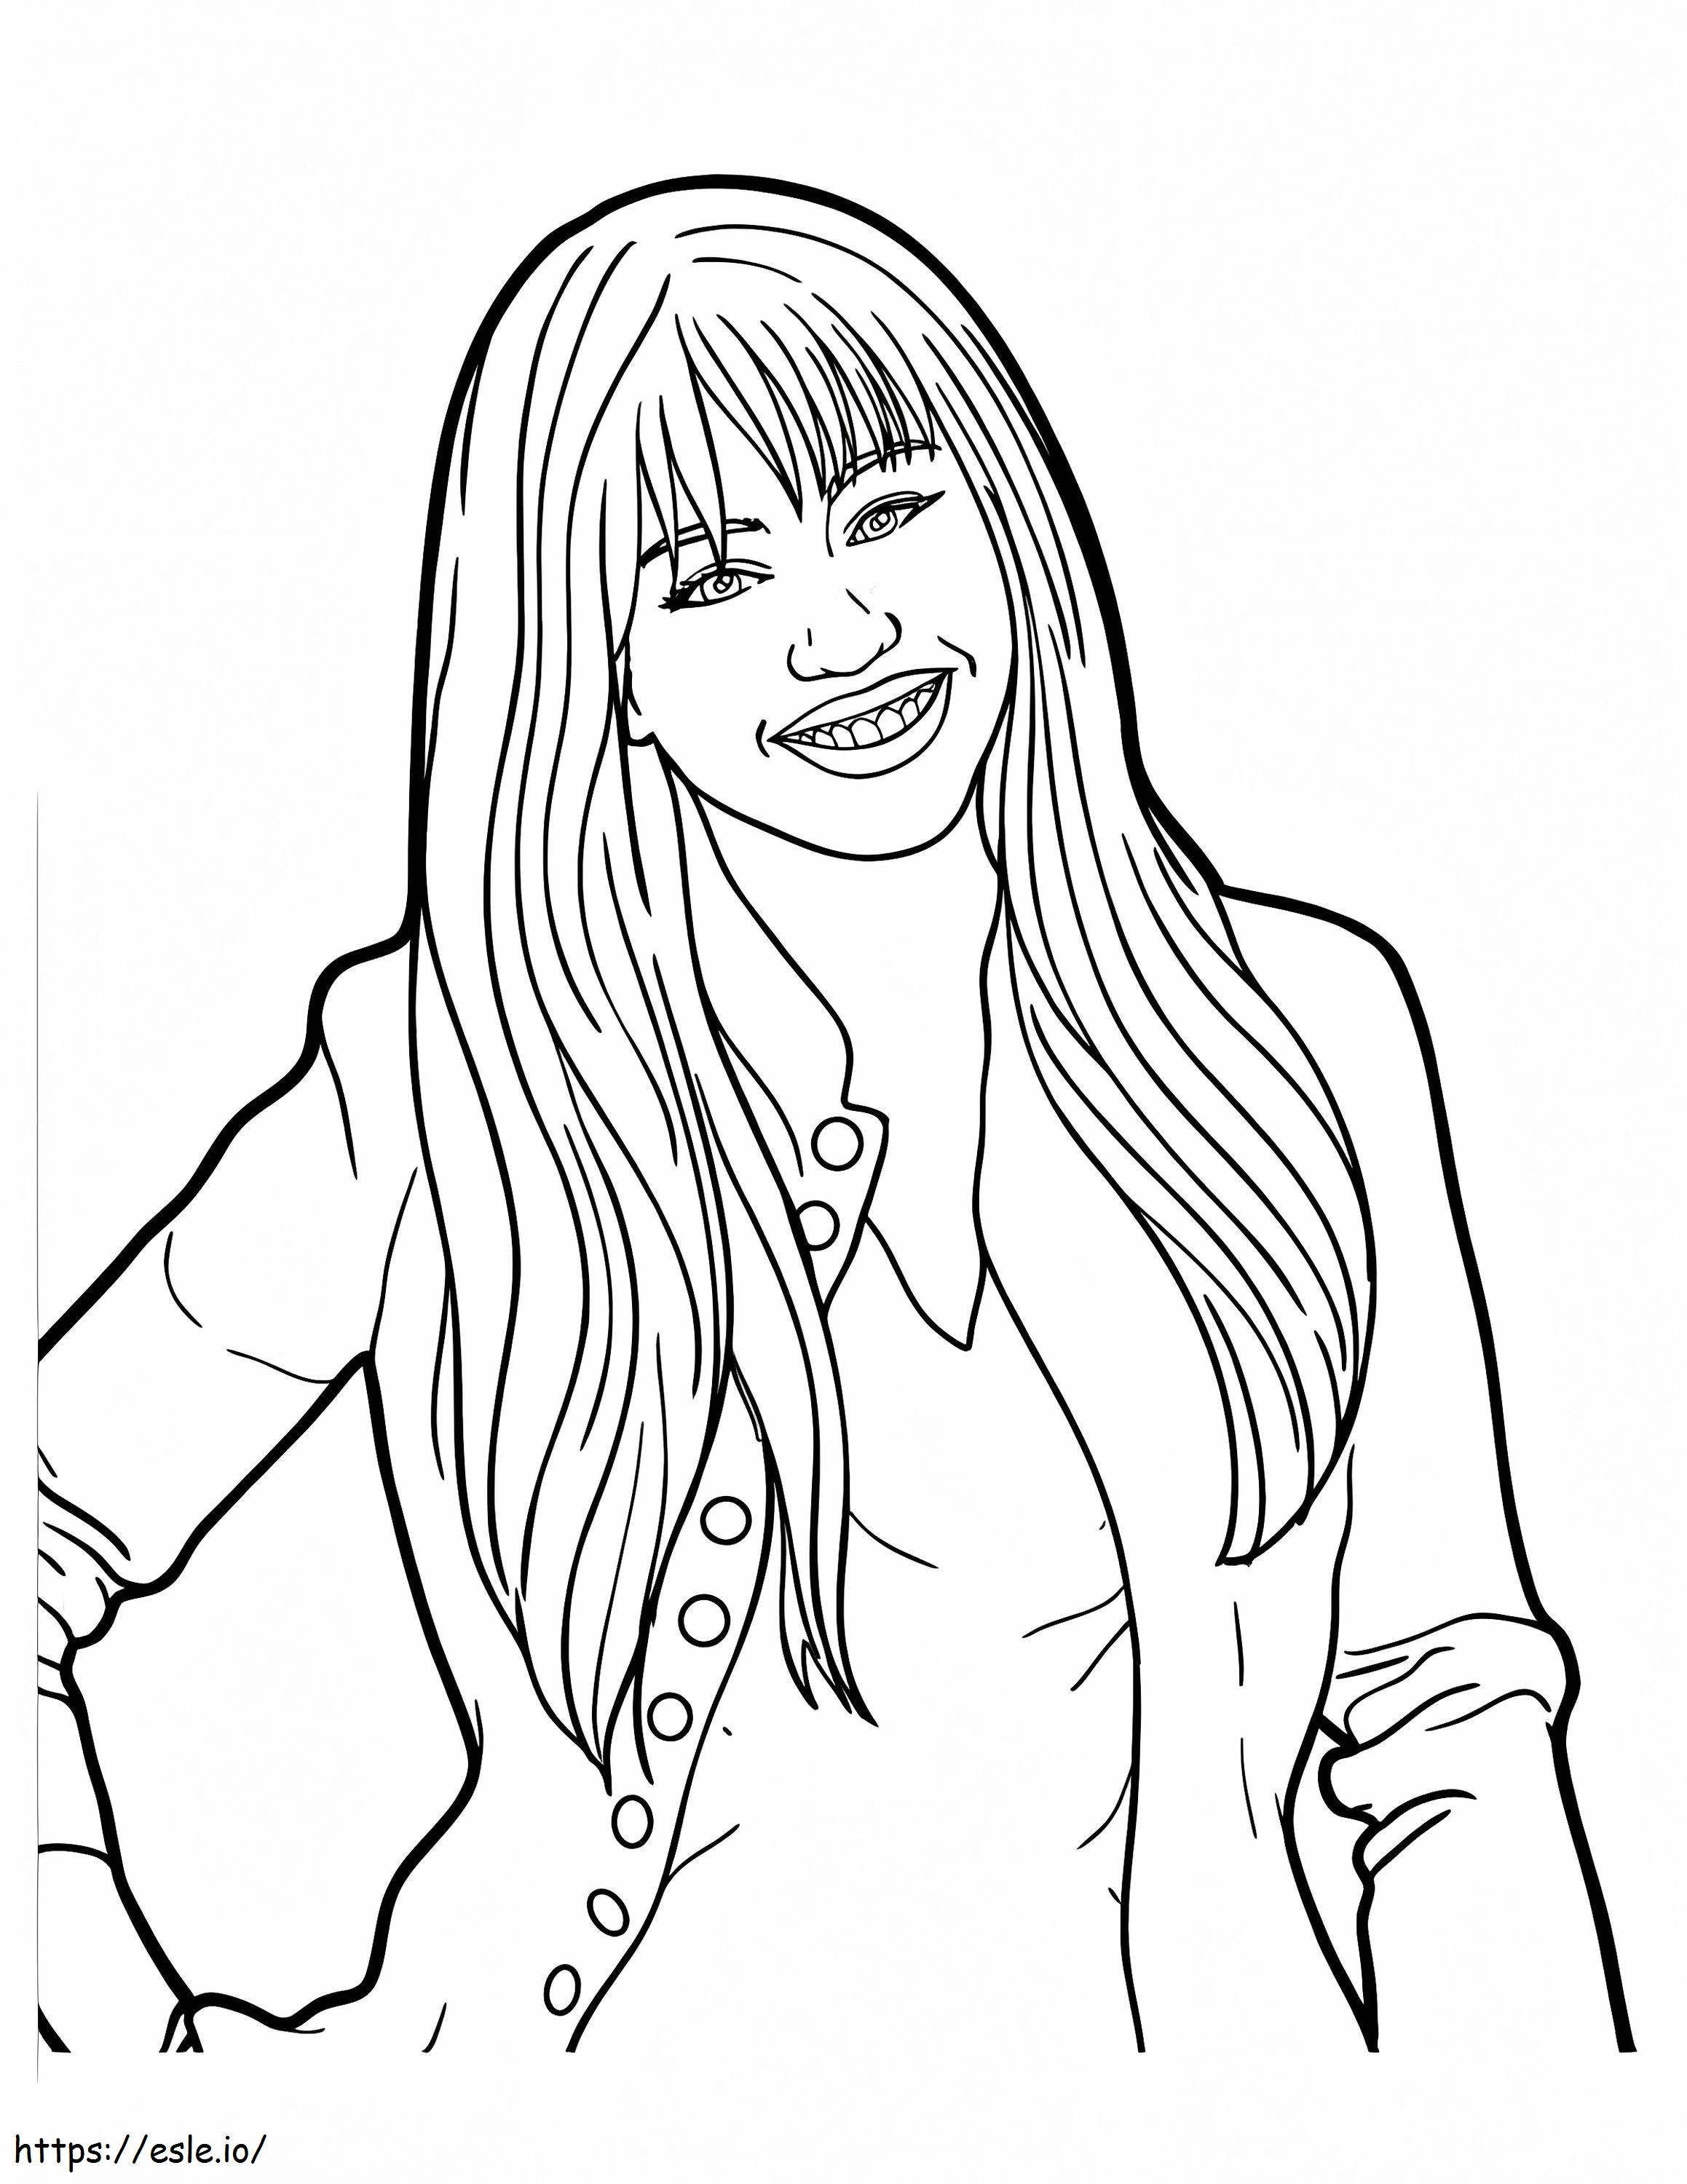 Hannah Montana Is Smiling coloring page